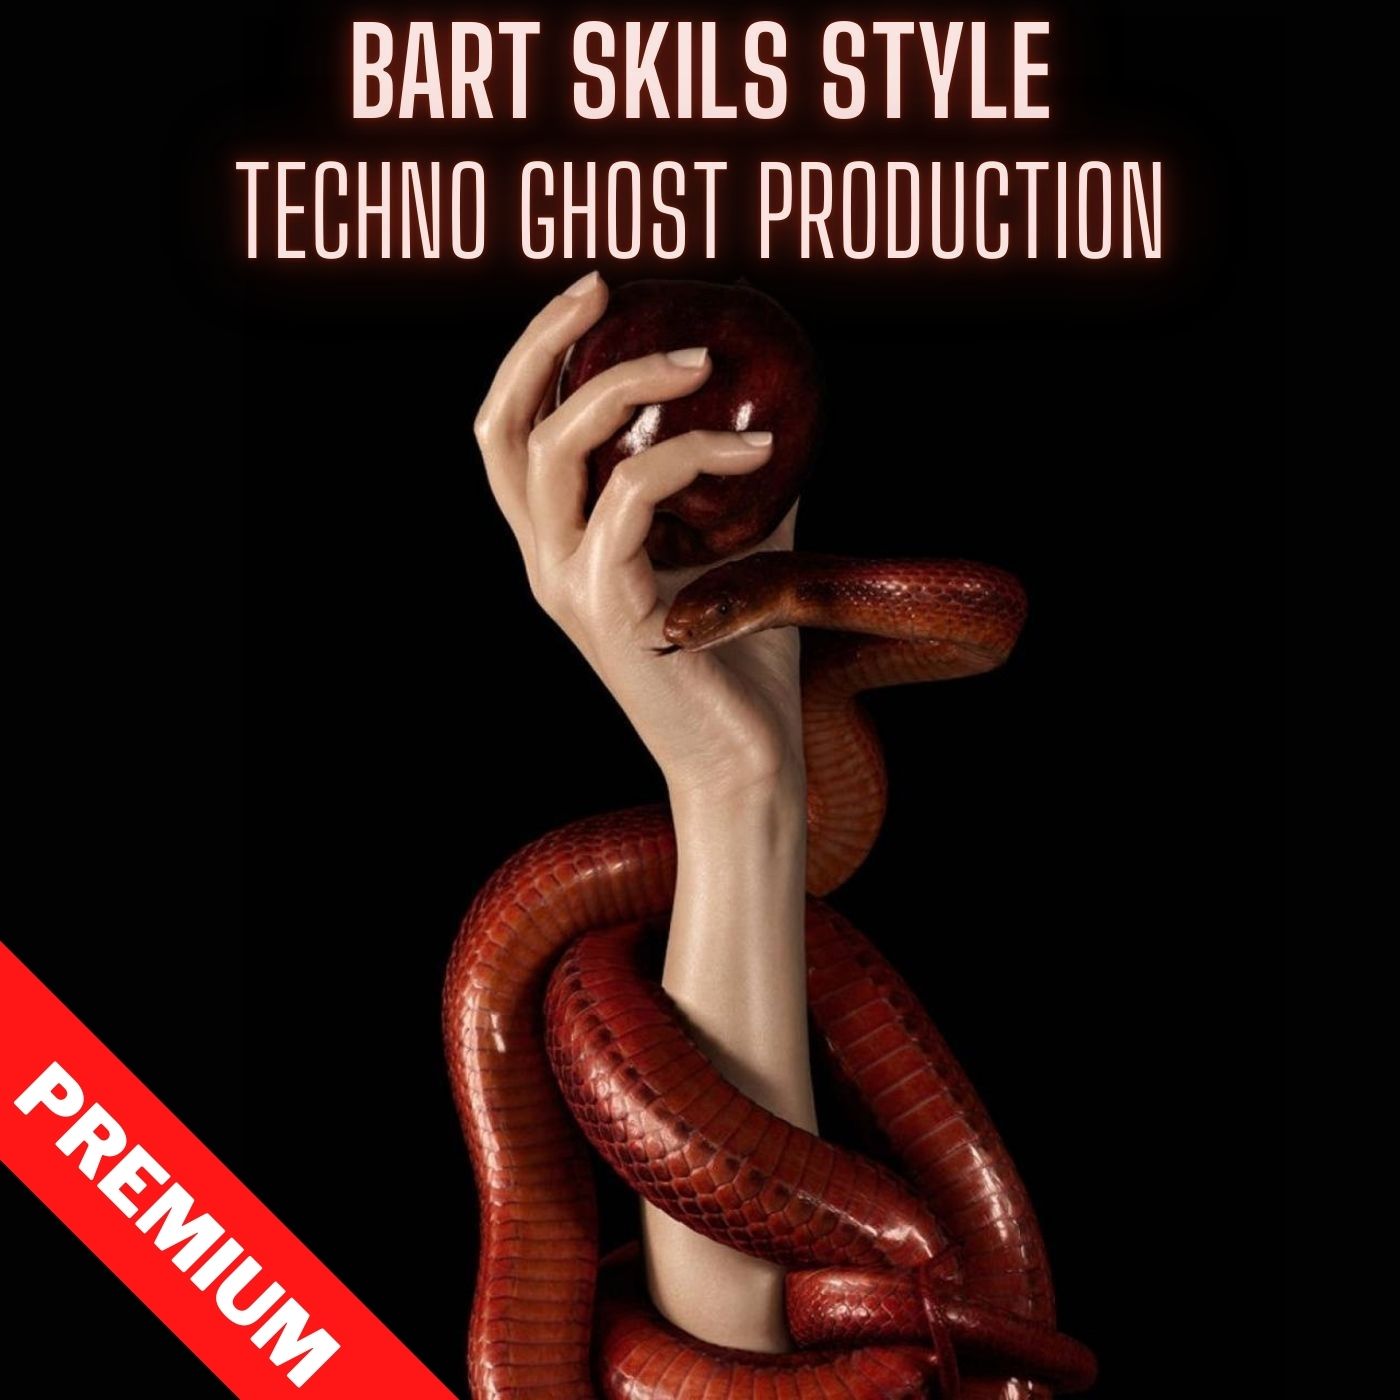 Bart Skils Style Techno Ghost Production